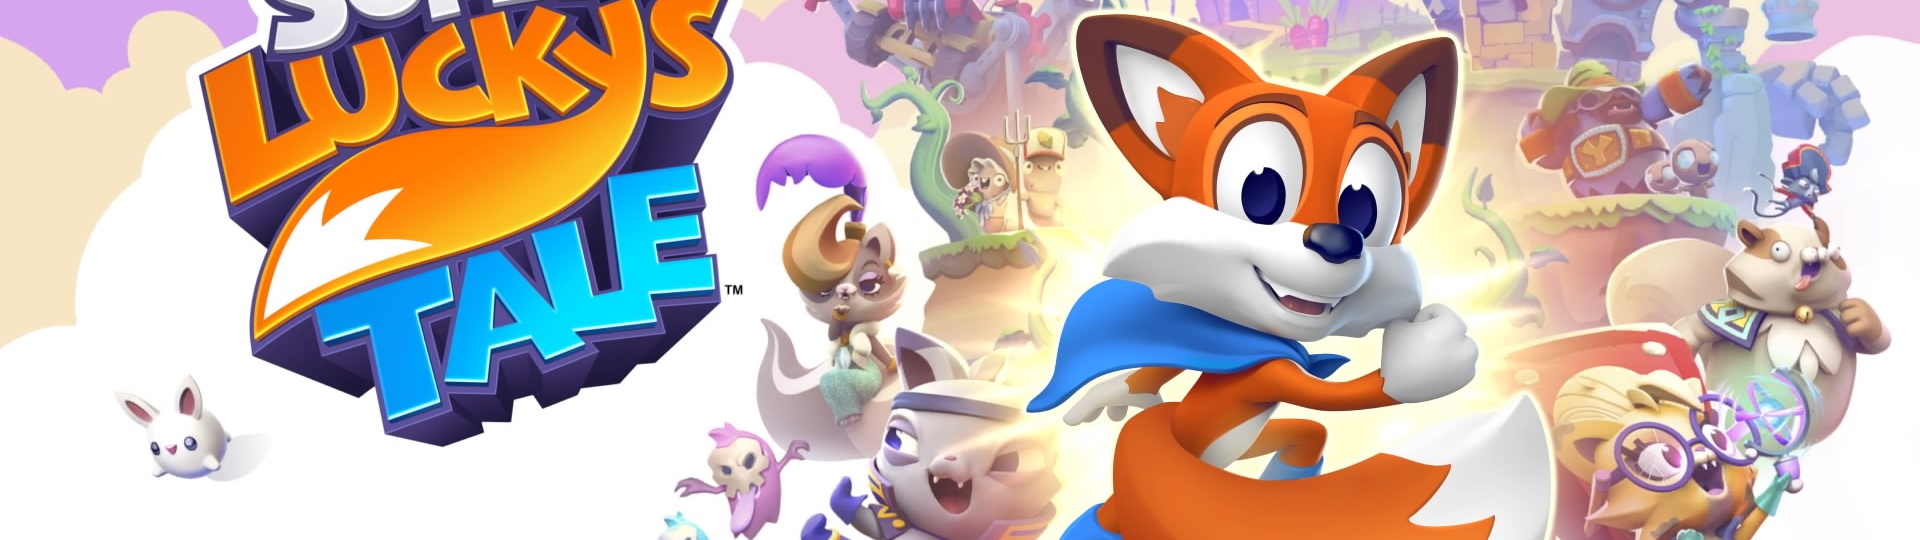 New Super Lucky's Tale | Recenze